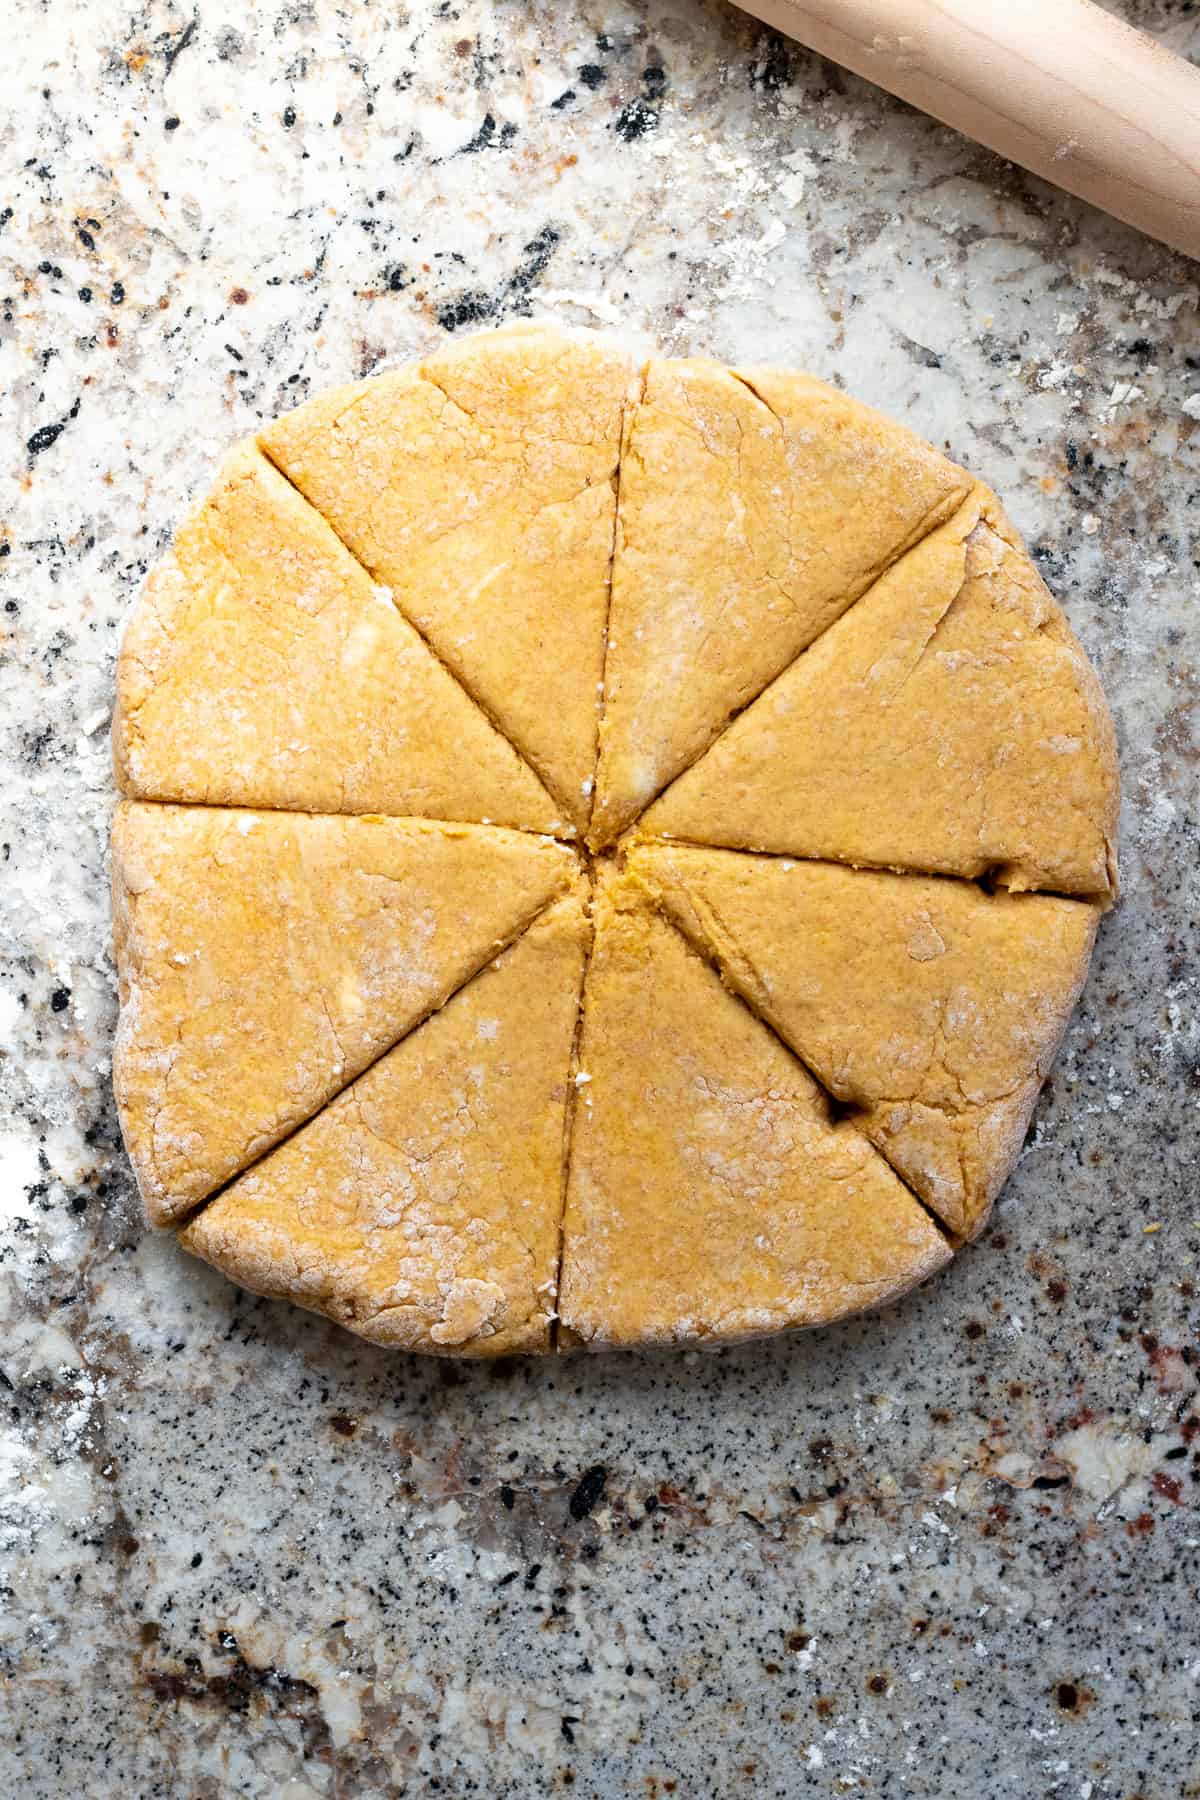 scone dough patted into a round and cut into 8 wedges